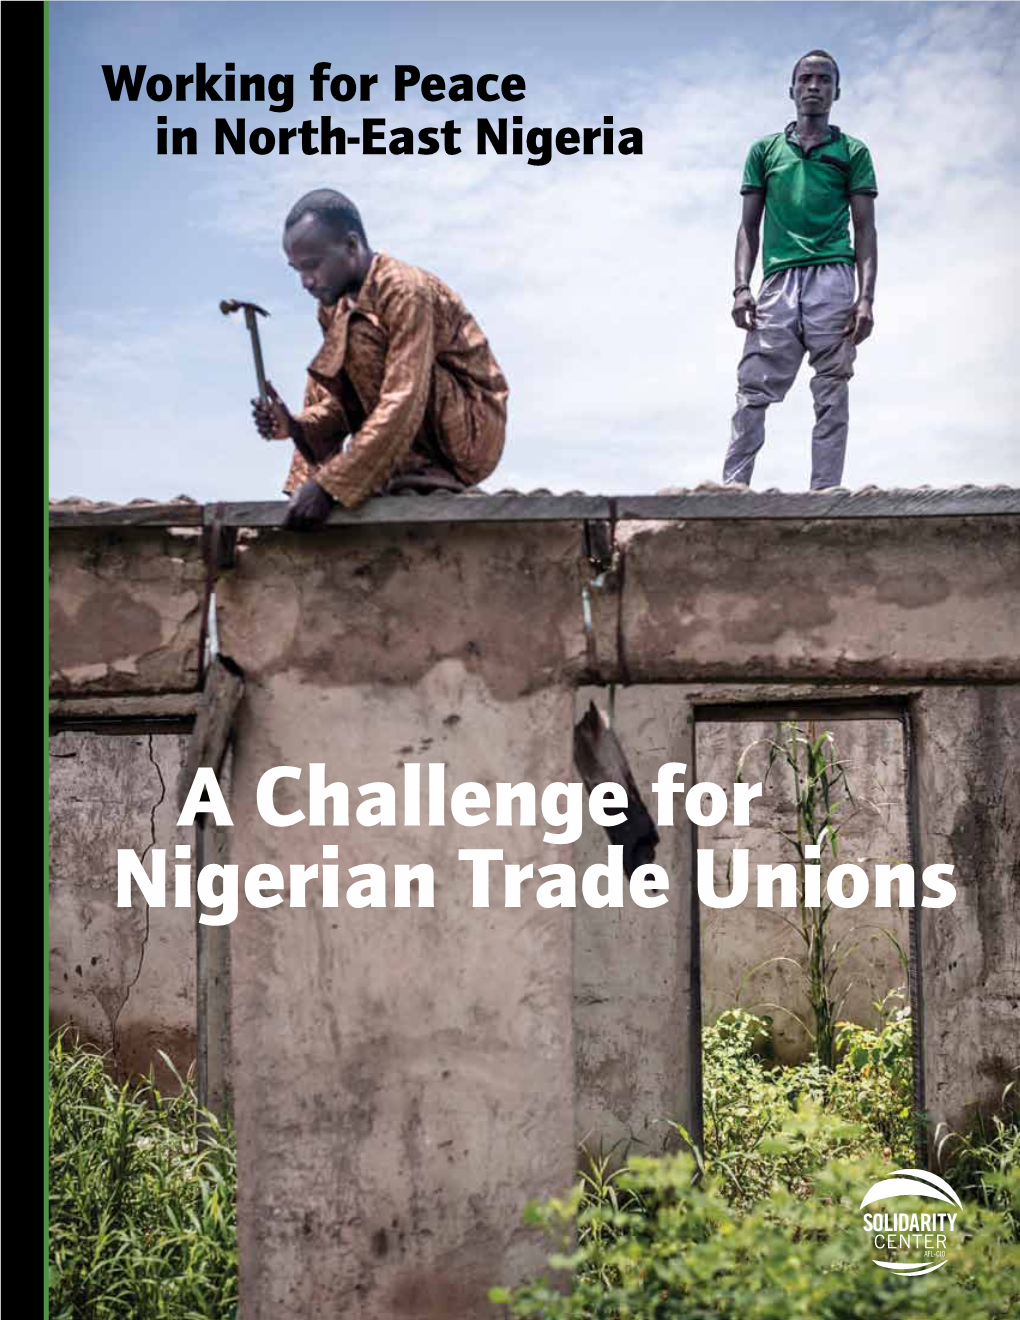 A Challenge for Nigerian Trade Unions